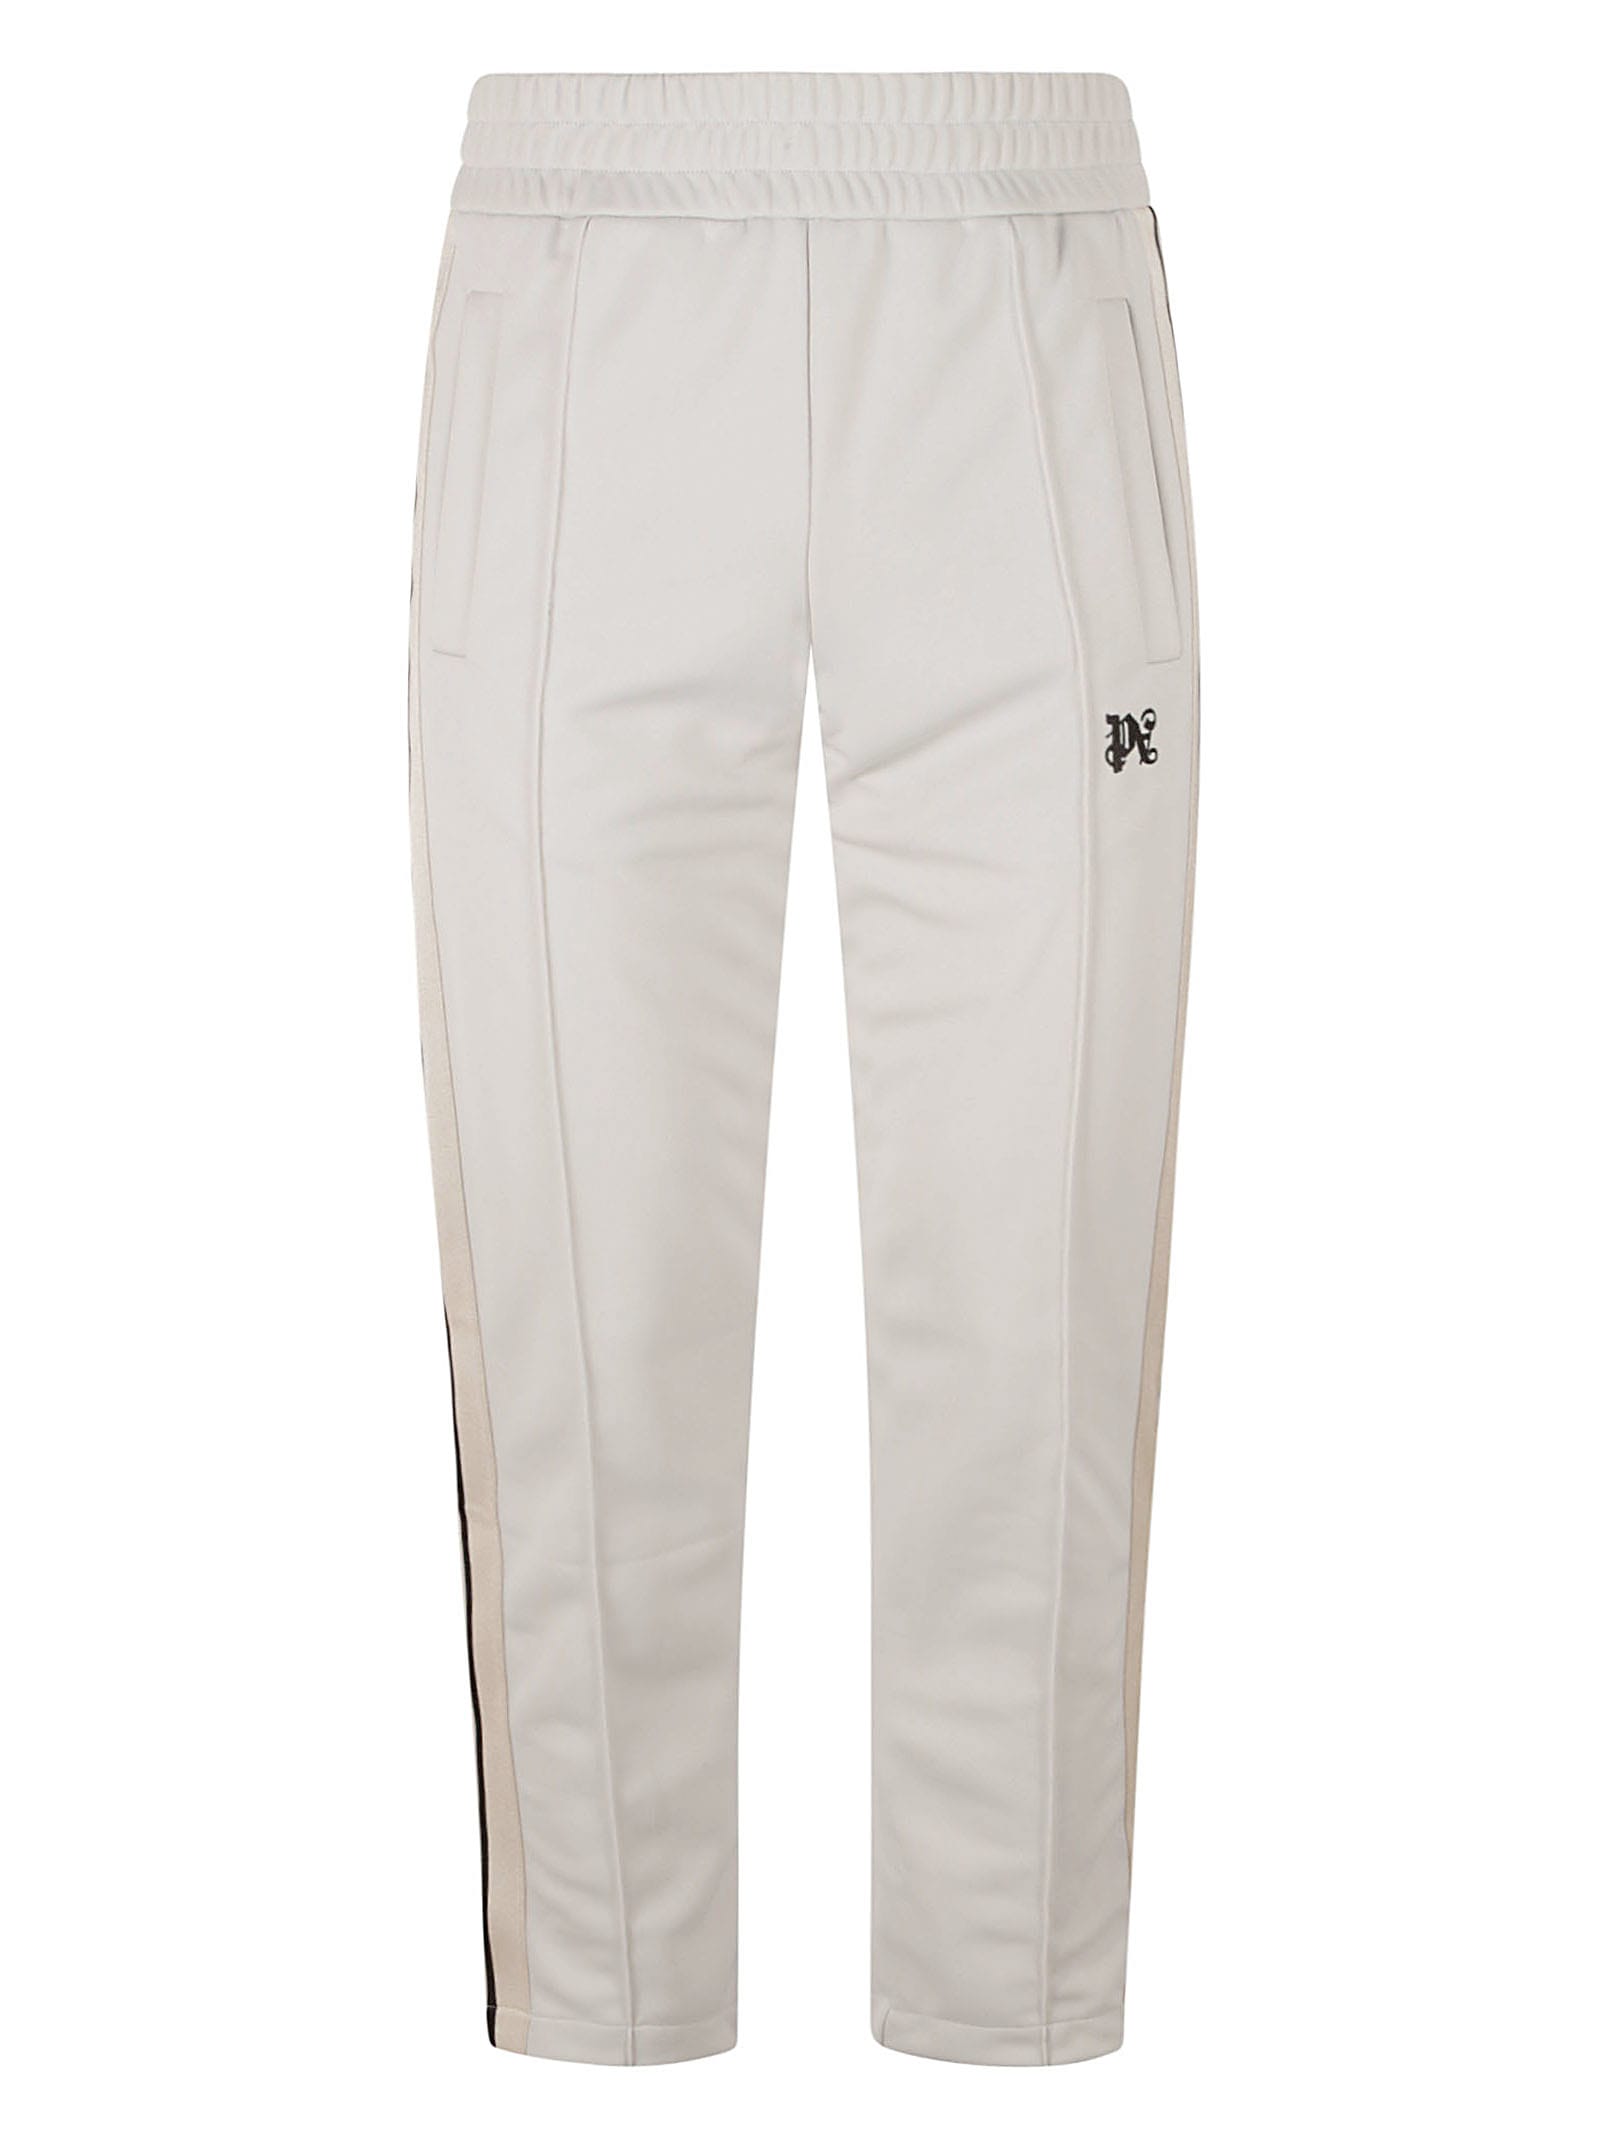 Palm Angels Monogram Track Pants In Light Grey/white